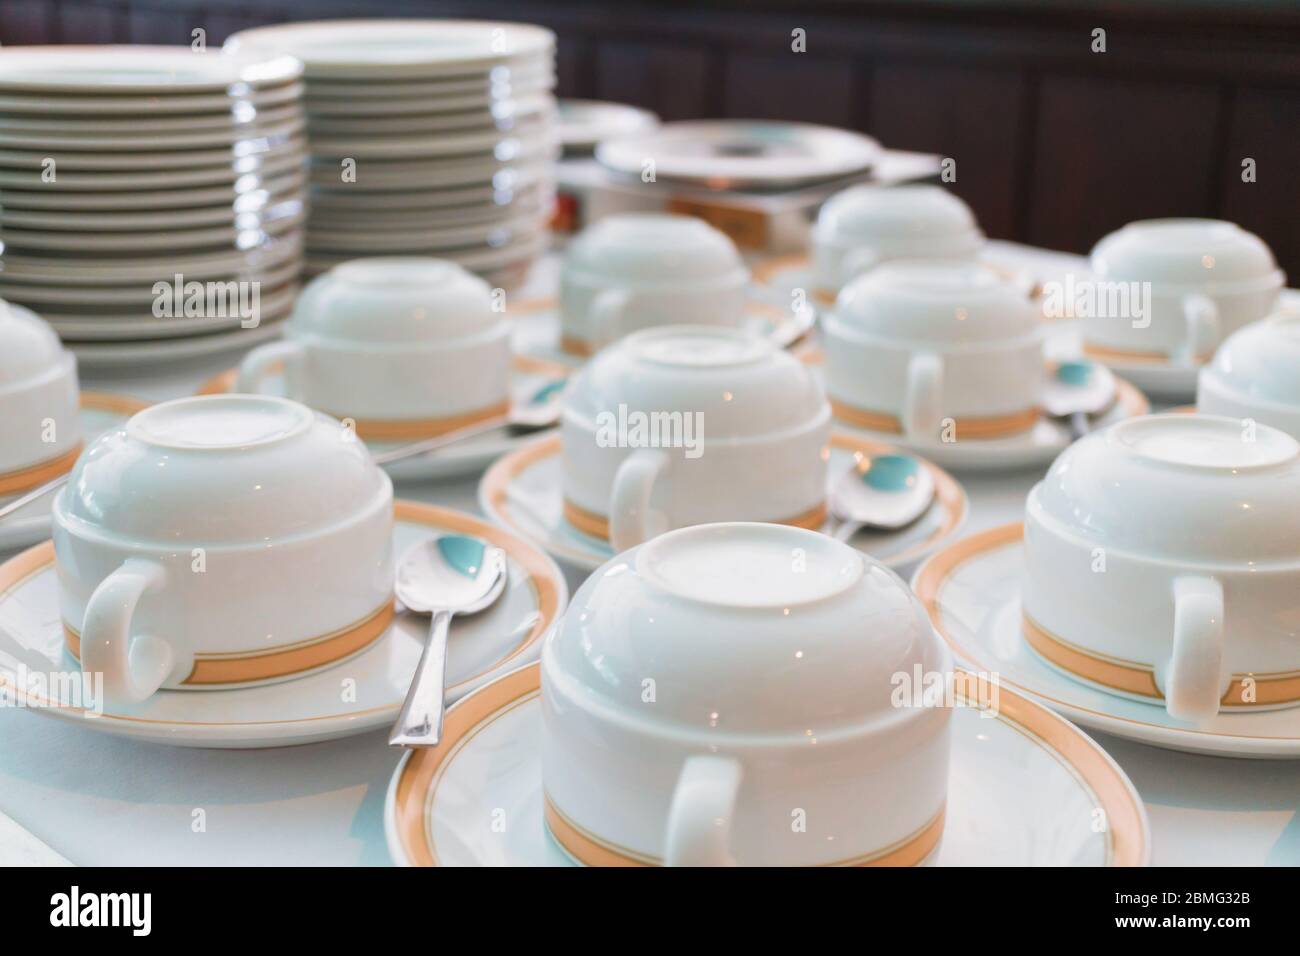 Group of ceramic cup and plates stacked on the table for tea or coffee service Stock Photo